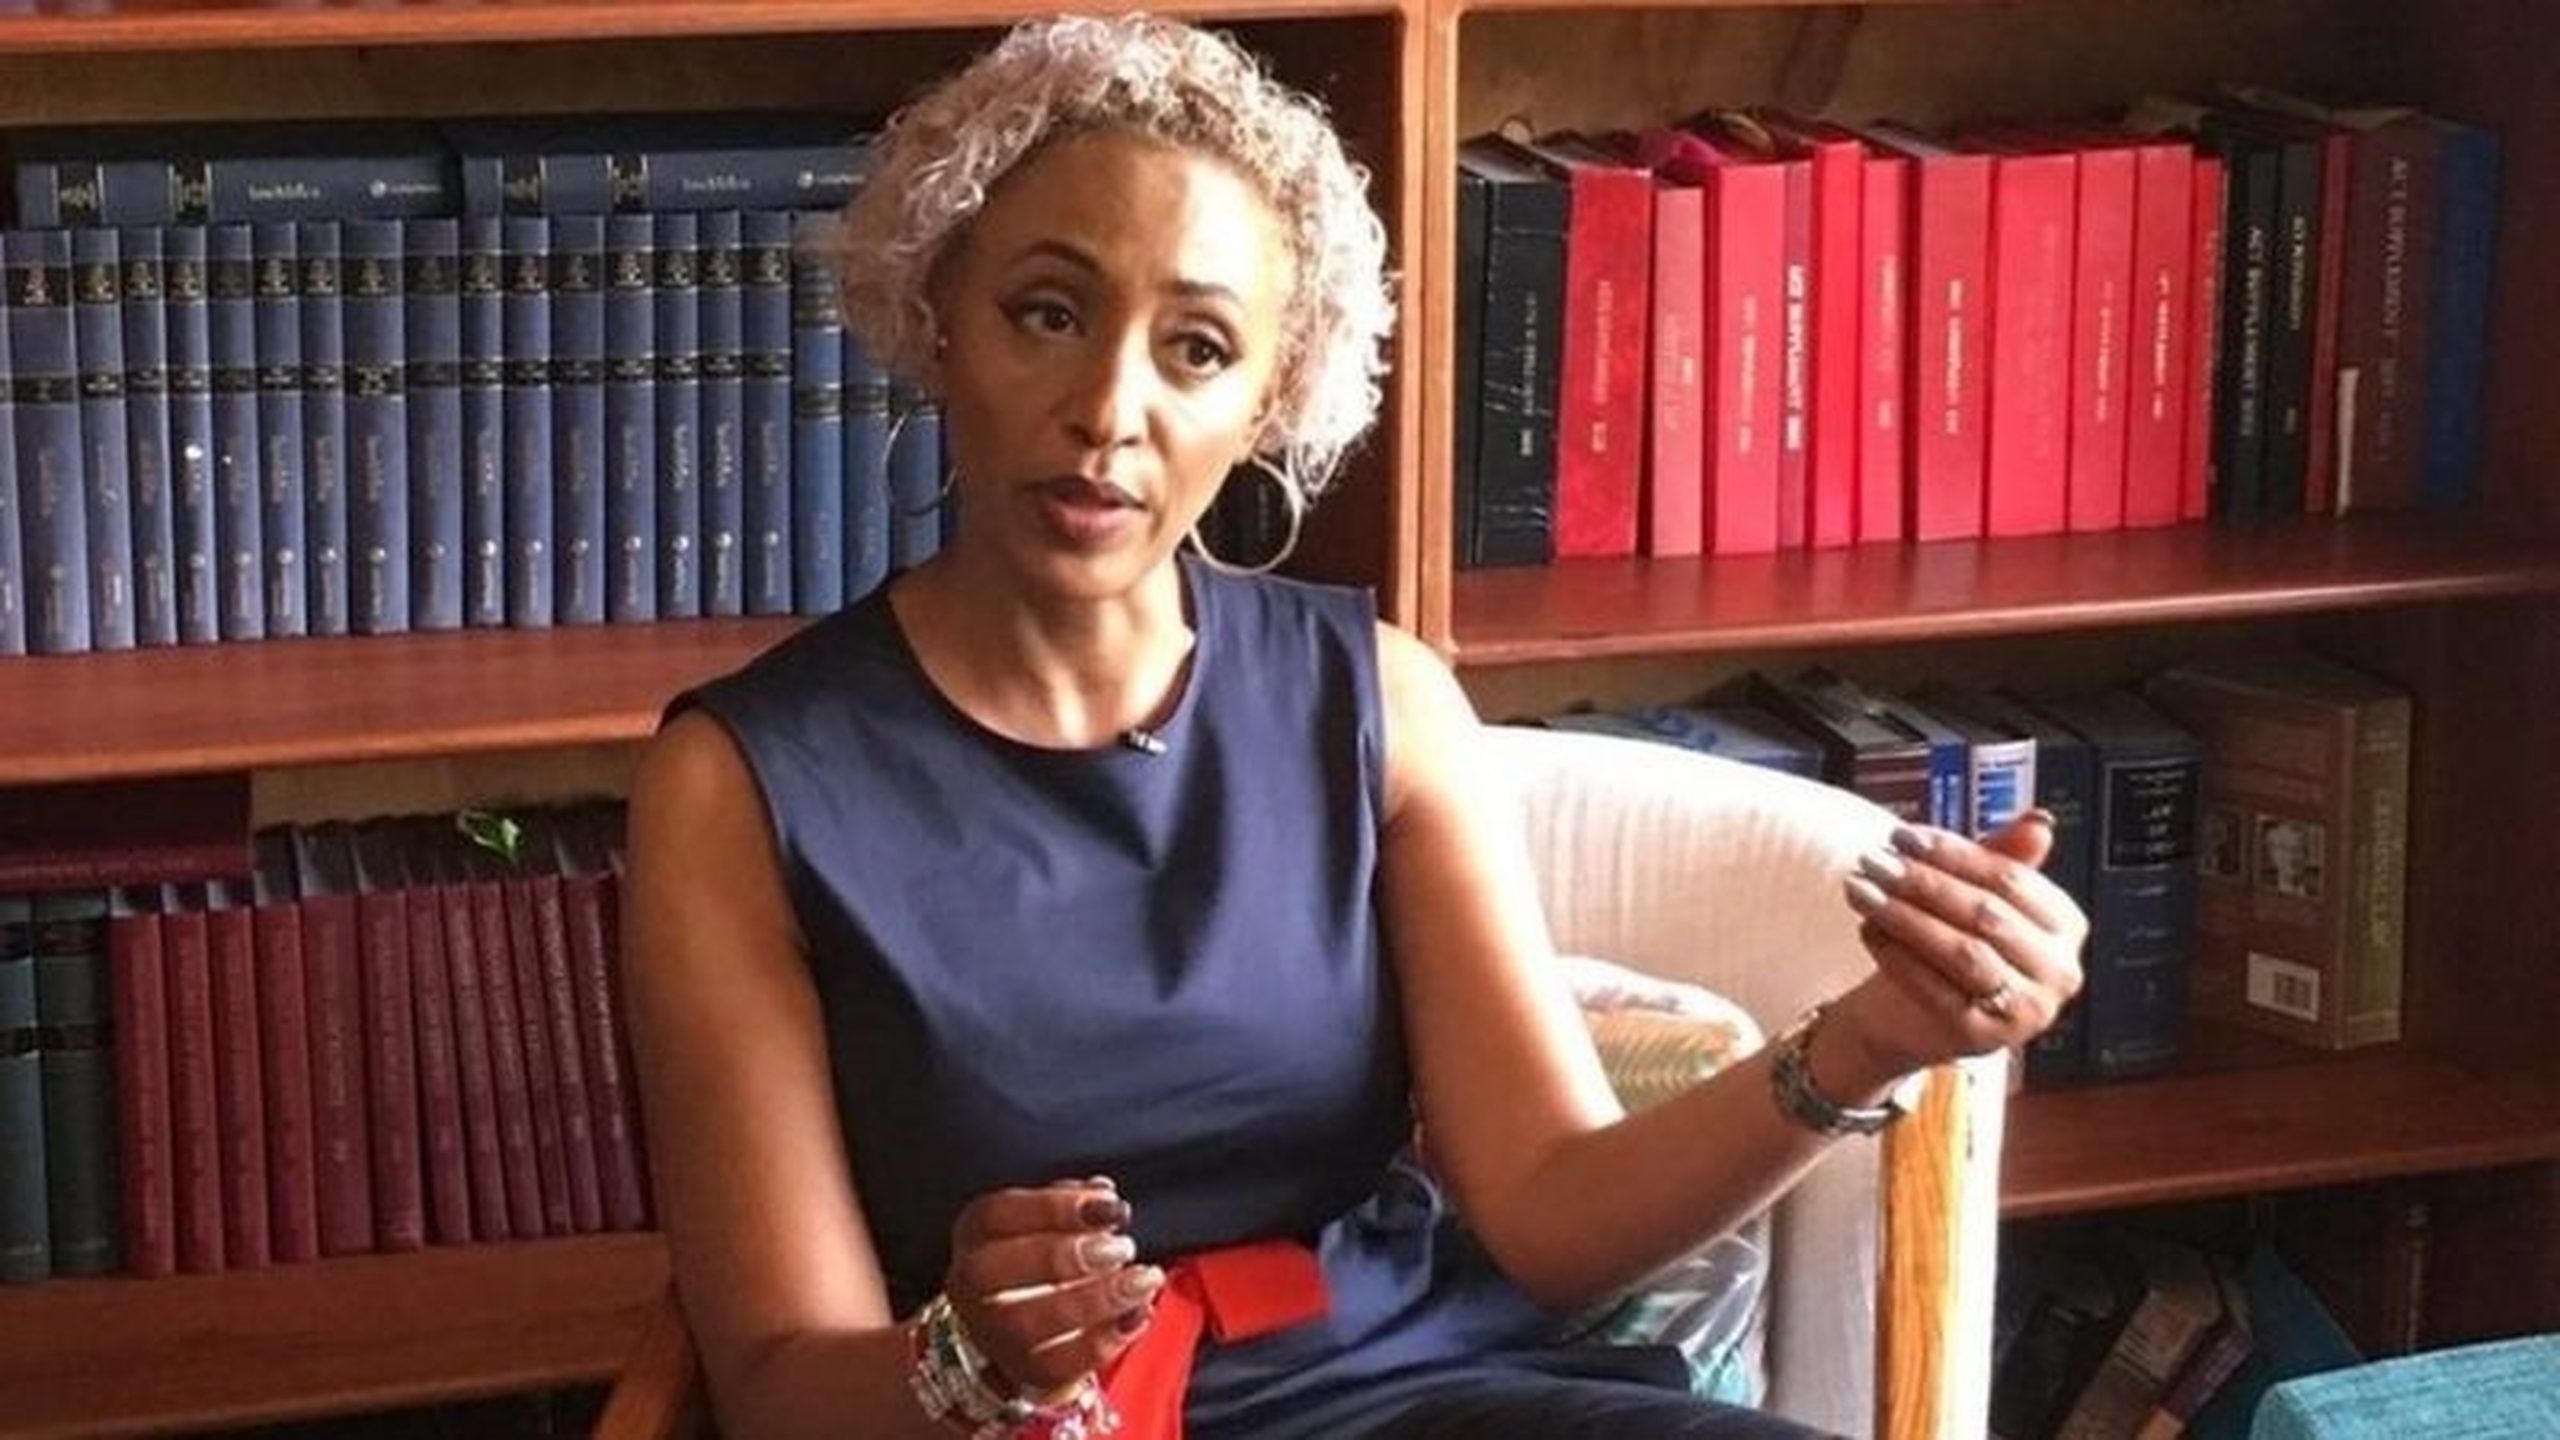 Tanzanian Outspoken Lawyer Fatma Karume Banned for Breach of ethics